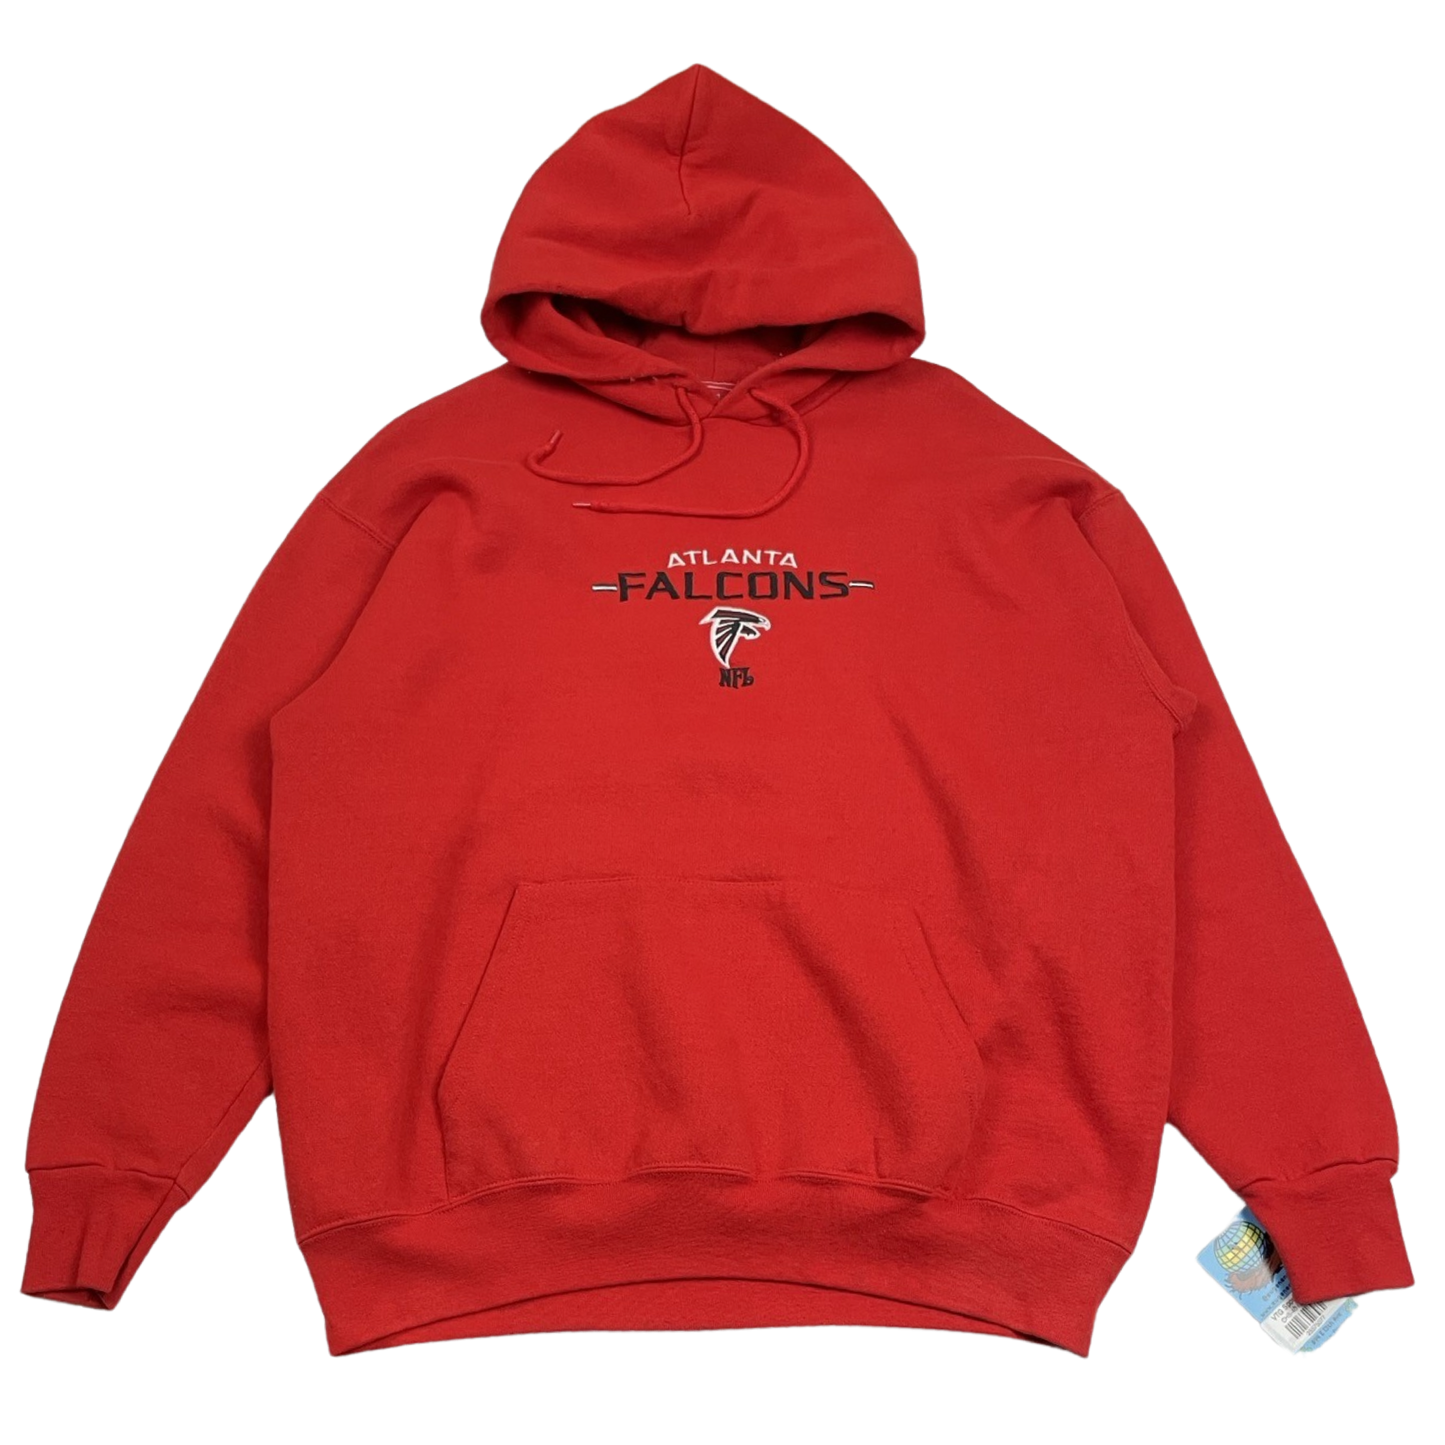 '00s Atlanta Falcons Embroidered Hoodie